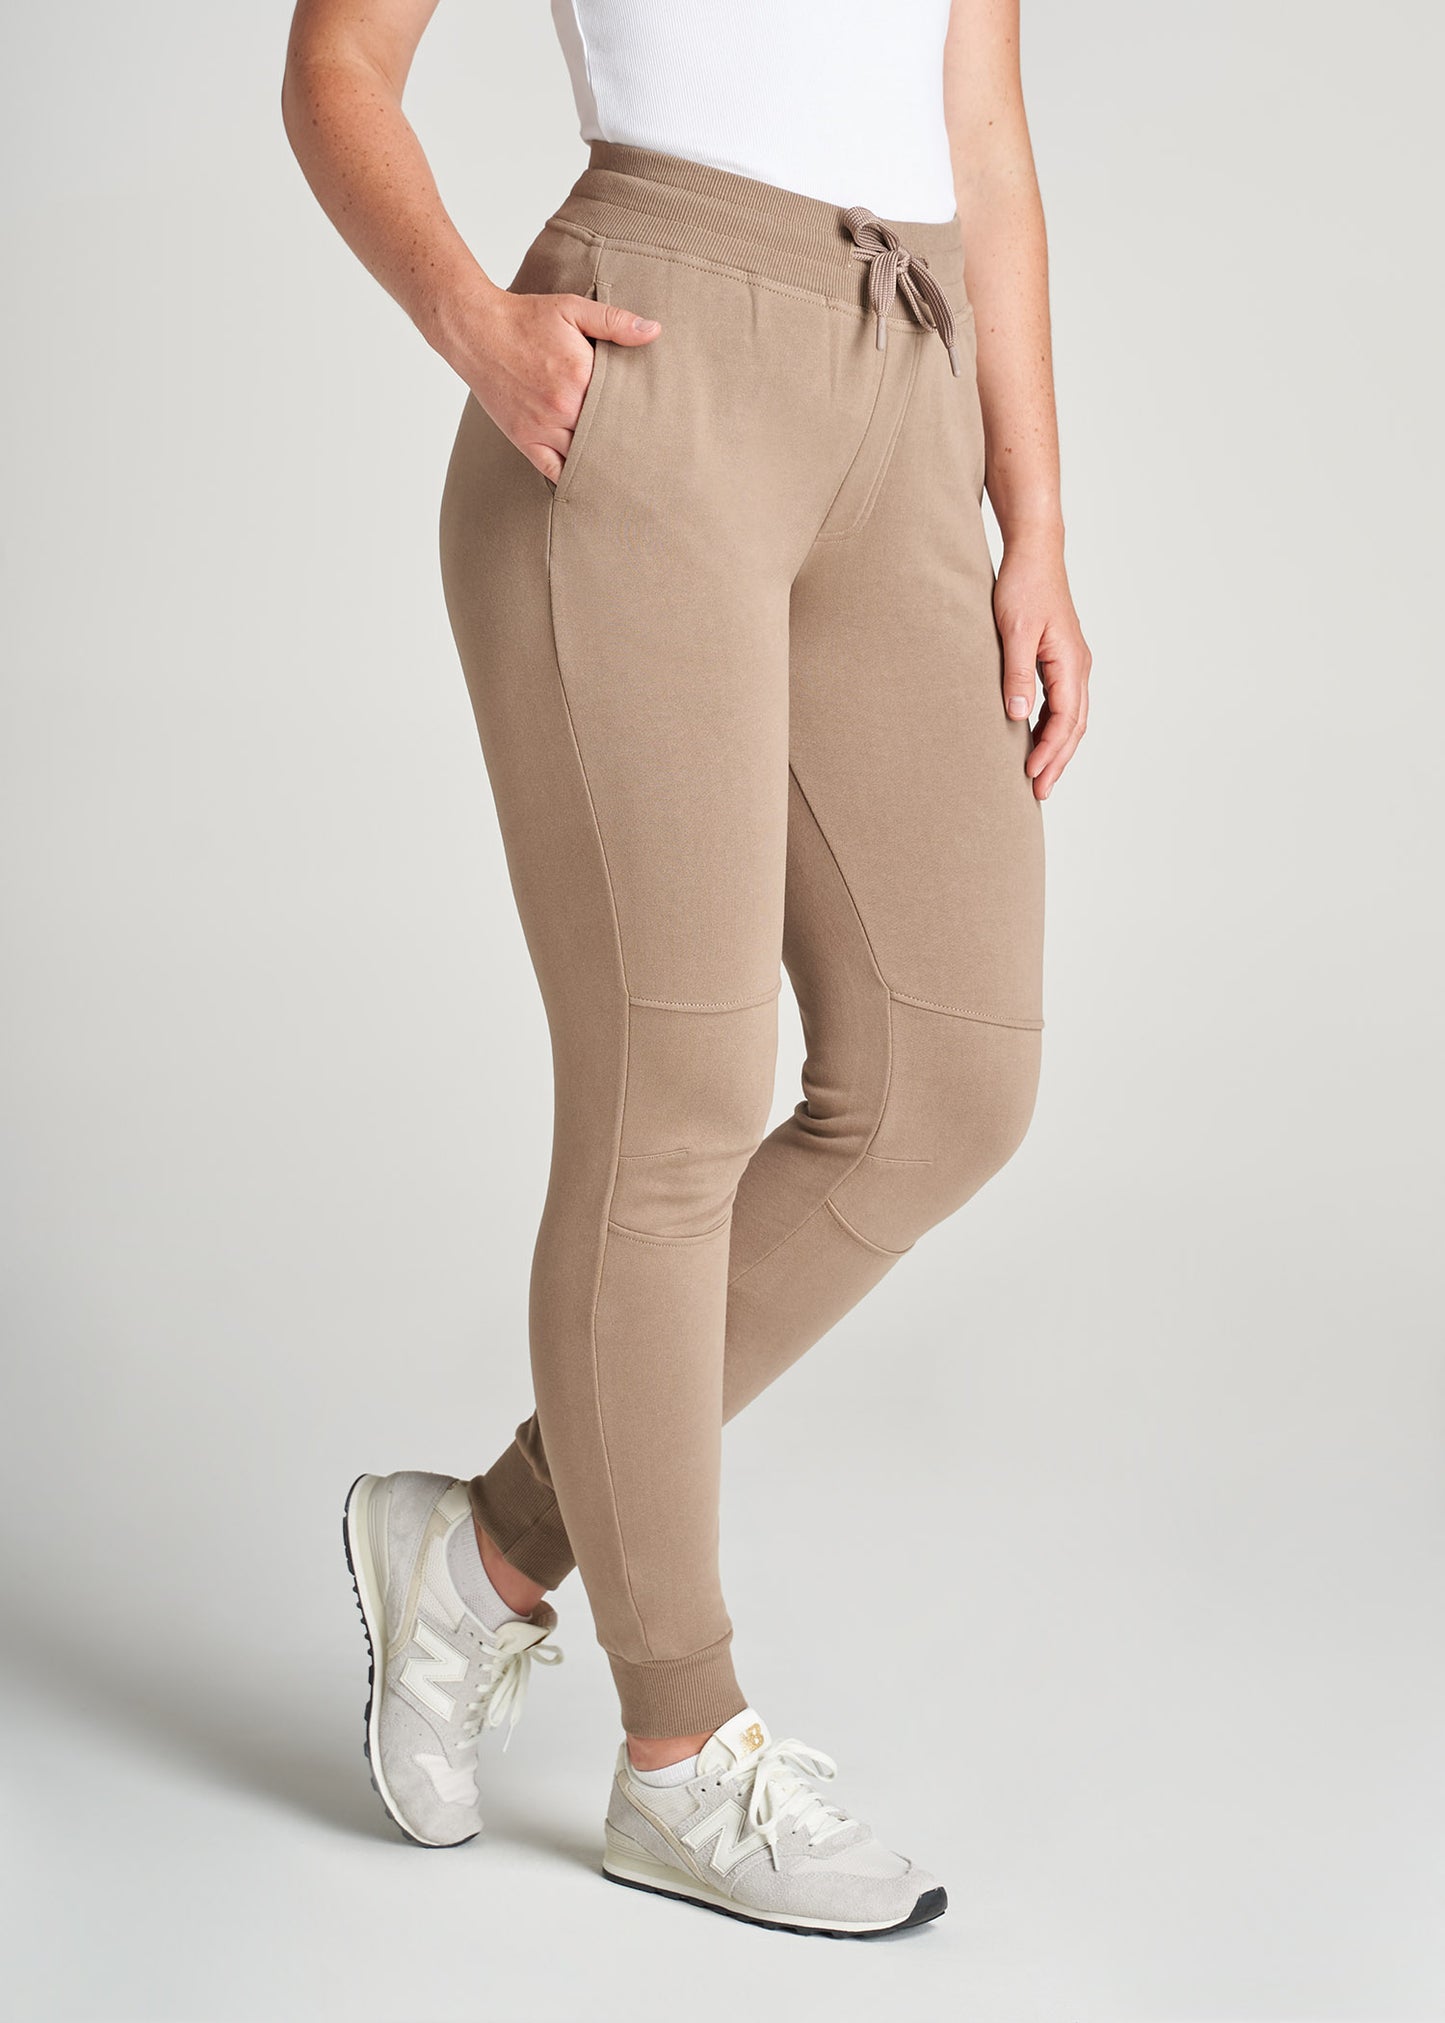 American-Tall-Women-Tall-FrenchTerry-Jogger-Latte-side